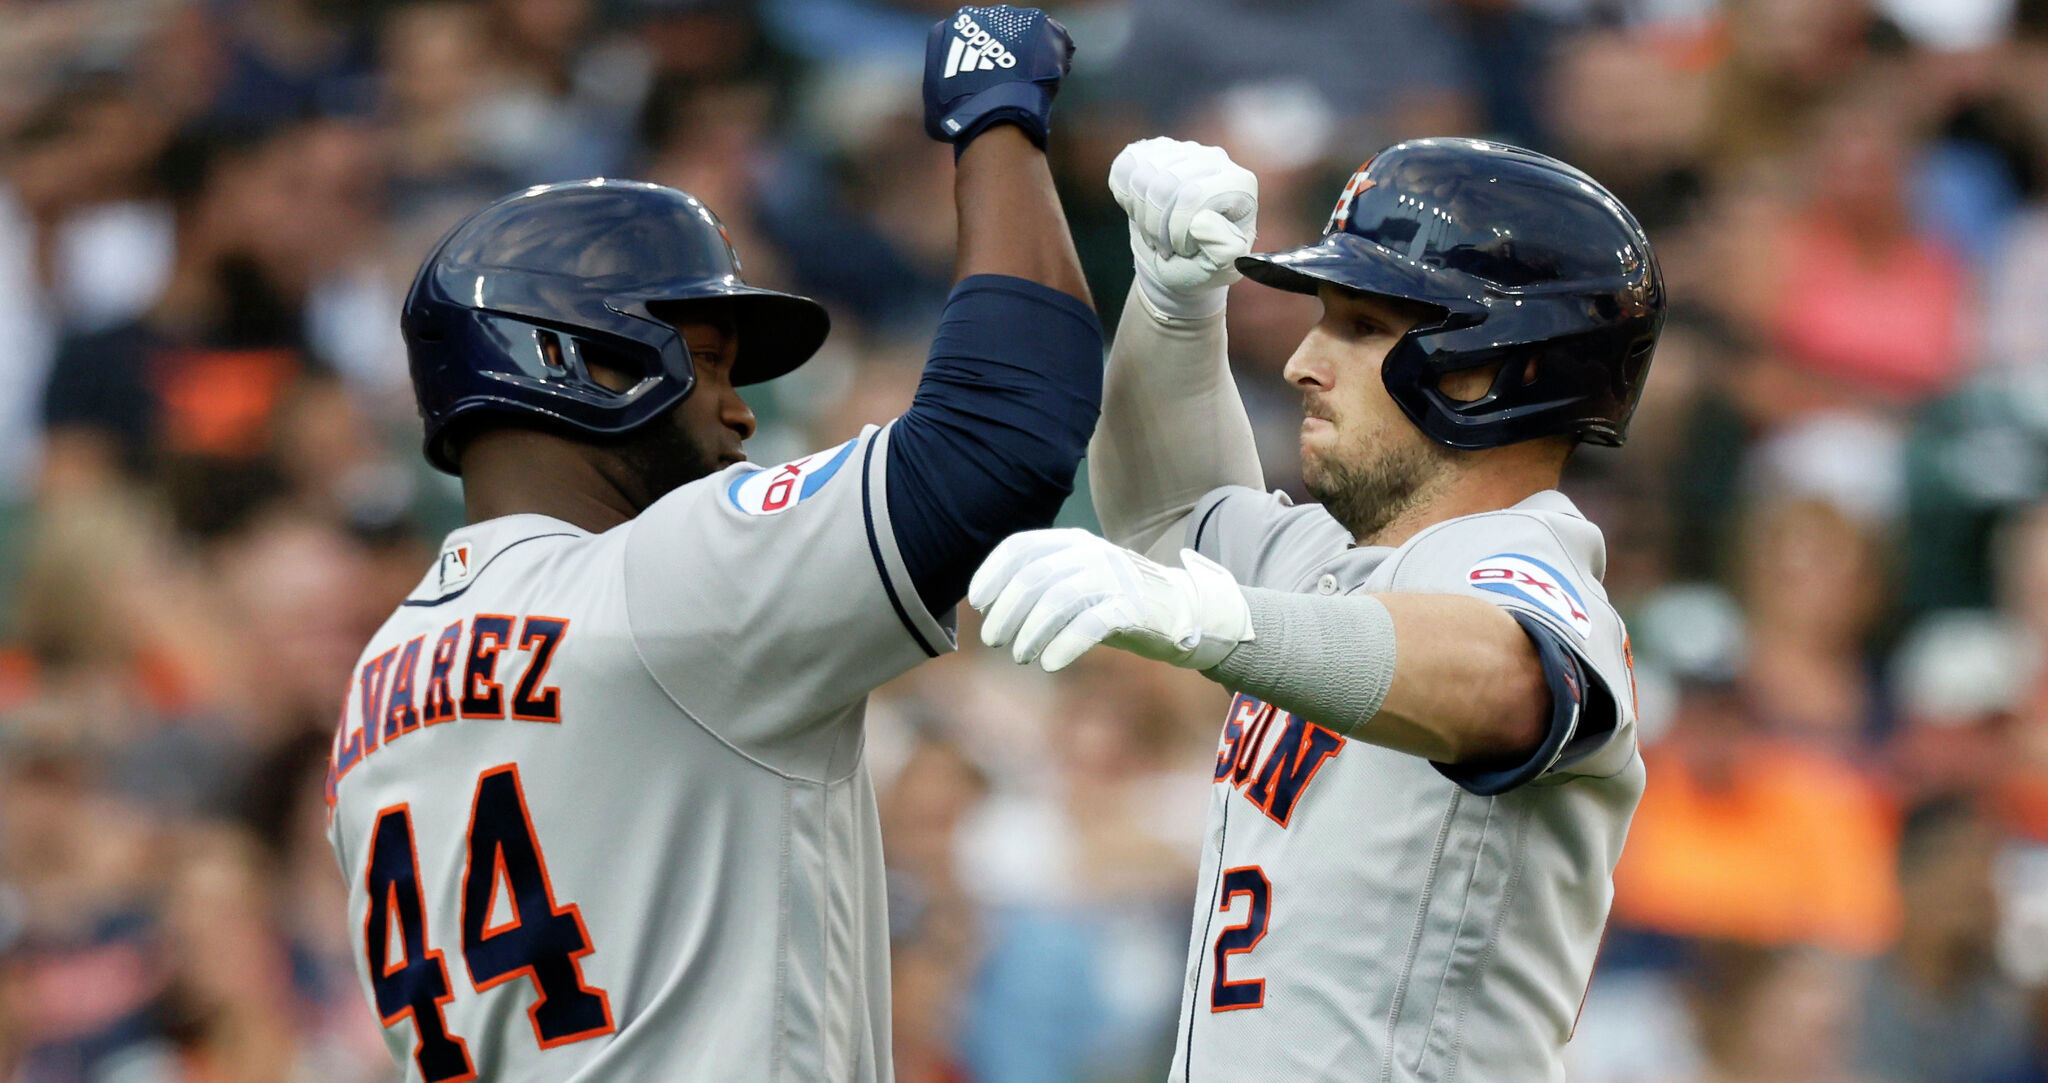 Astros 9, Tigers 2 Houston responds with a blowout victory